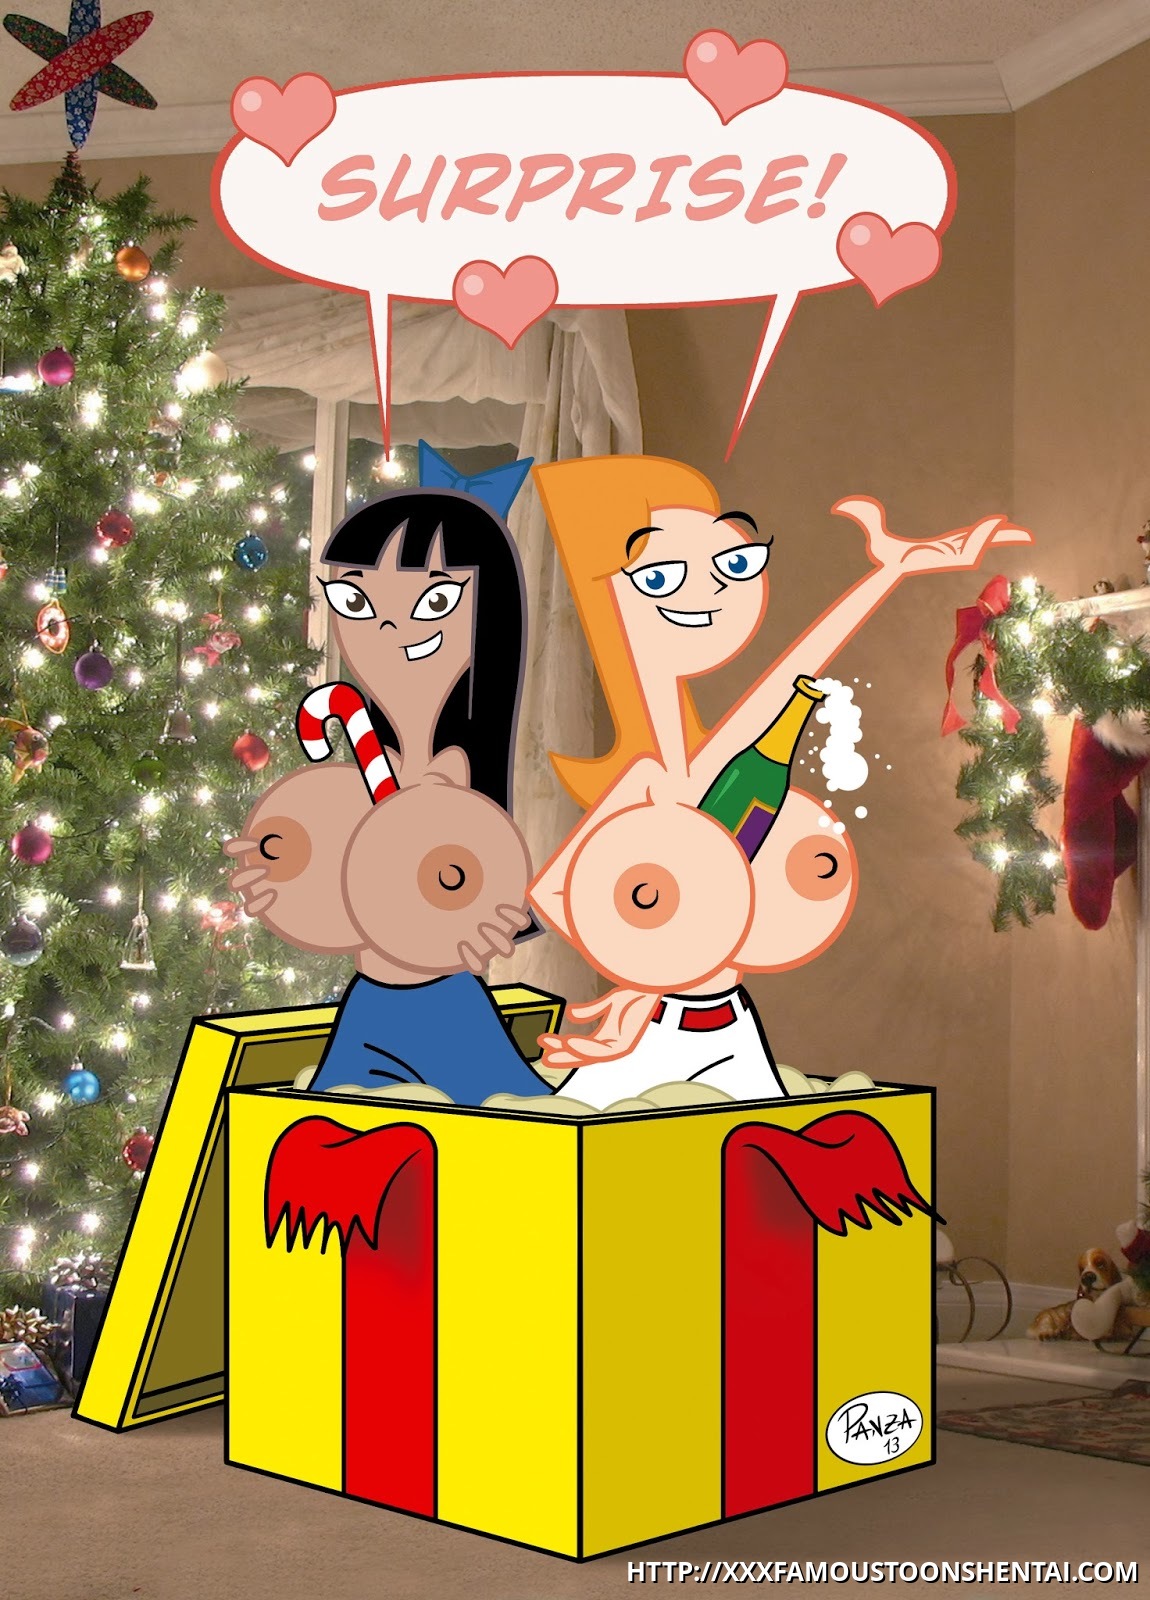 Phineas And Ferb Candace And Stacy Porn - Candace Flynn and Stacy Hirano busty surprise â€“ Phineas and Ferb Cartoon Sex